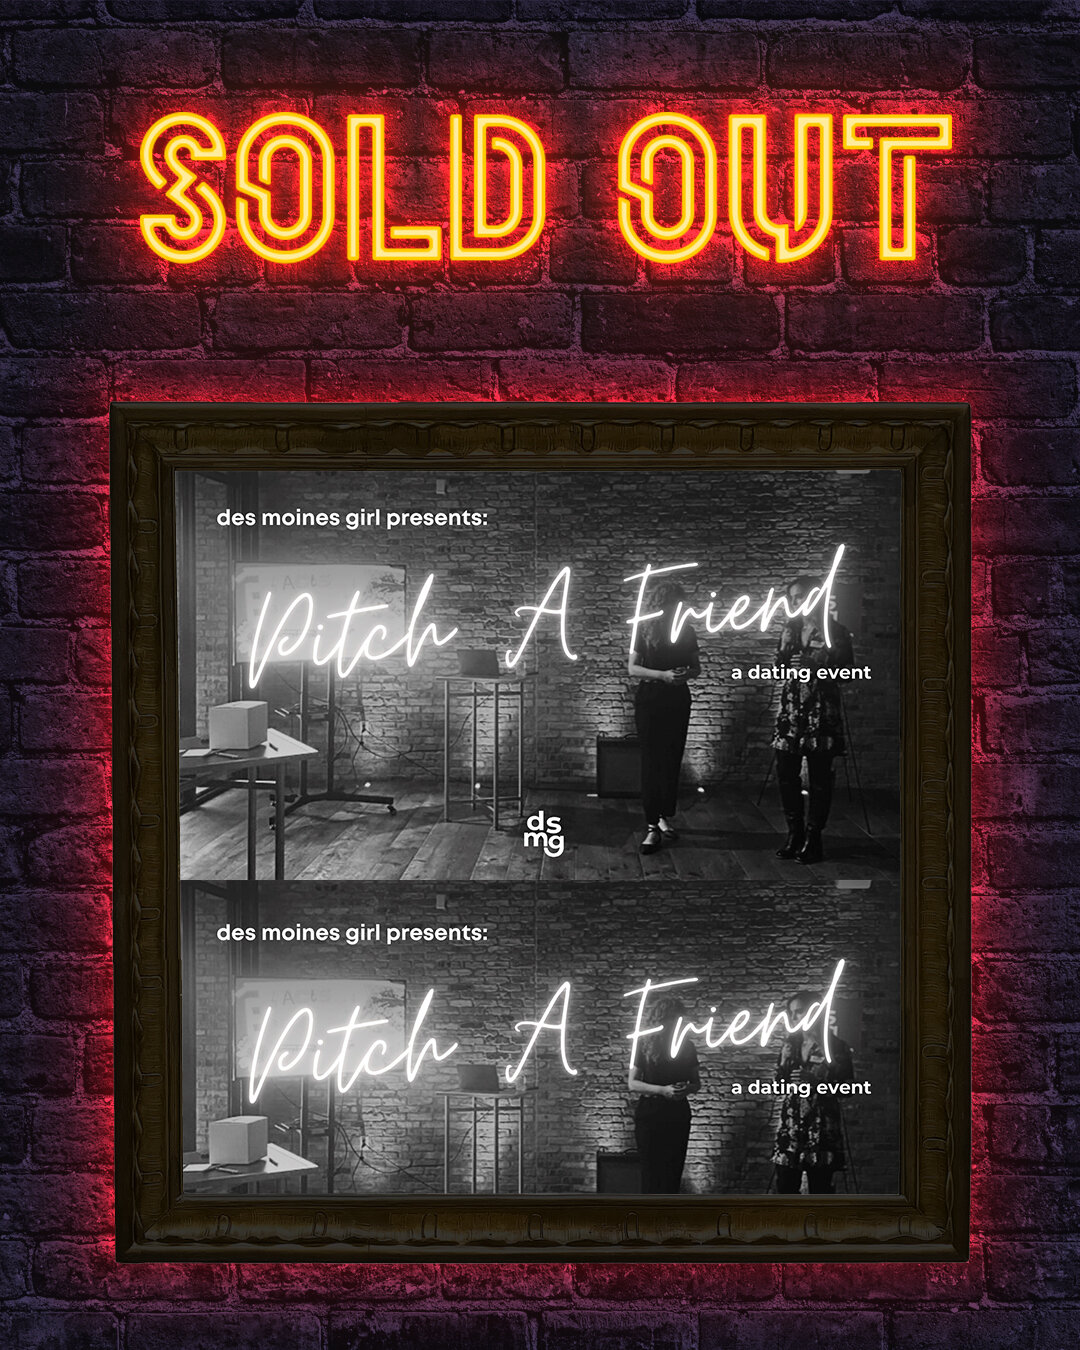 Just a reminder that we are SOLD OUT on pre-sale tickets of Pitch A Friend with @desmoines_girl on Sunday! 🎟️🧨🎉

We'll be selling 25 walk-up tickets, first come first serve, at the door.

3 PM Show (2:30 PM Doors)
$25 per ticket